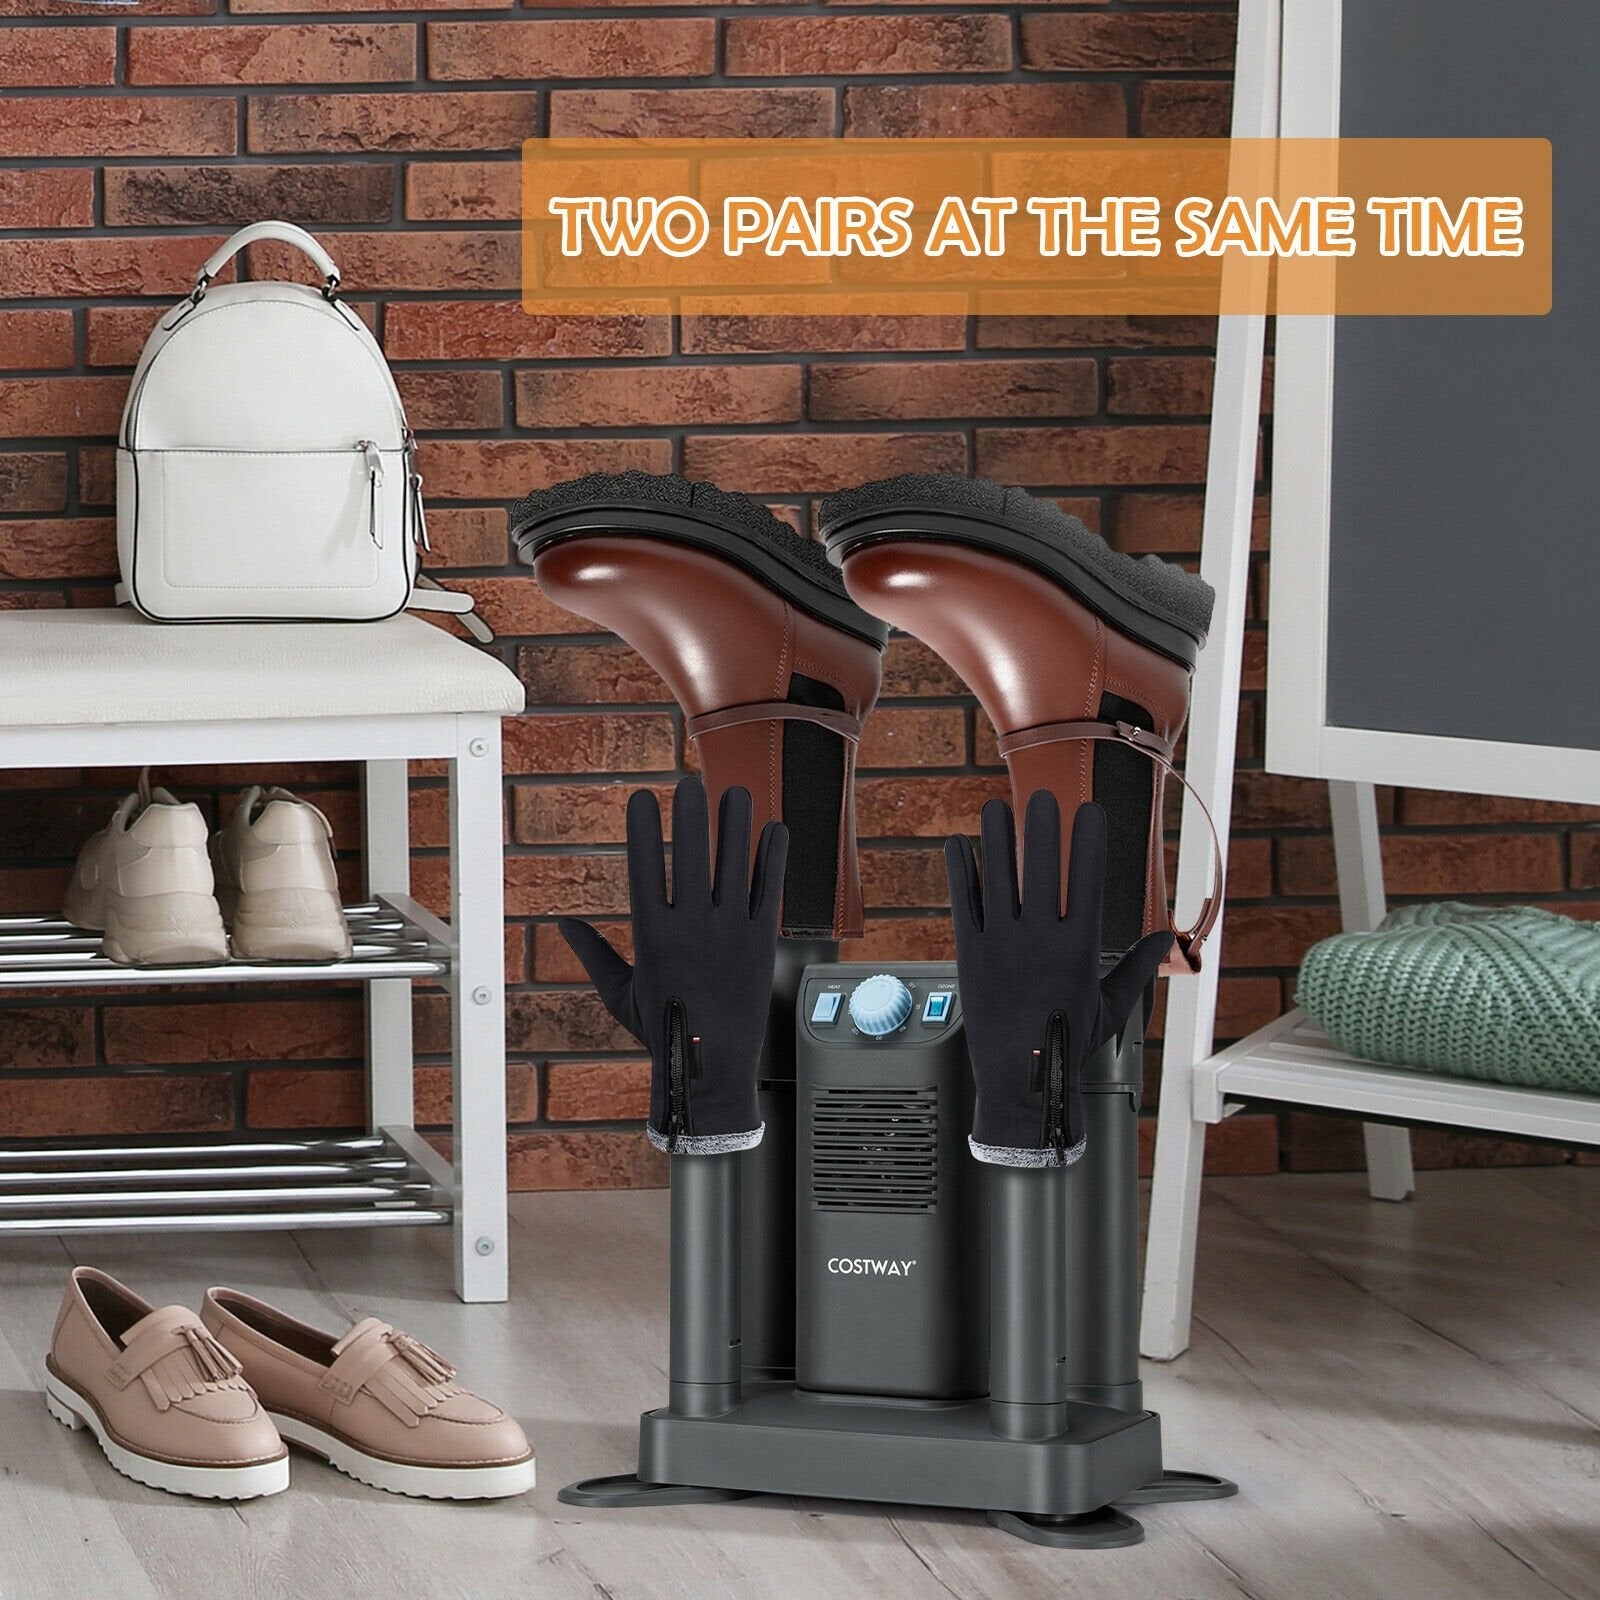 Electric Shoe Boot Dryer 4 Shoes with 180 Mins Timer Ozone Disinfection, Gray at Gallery Canada